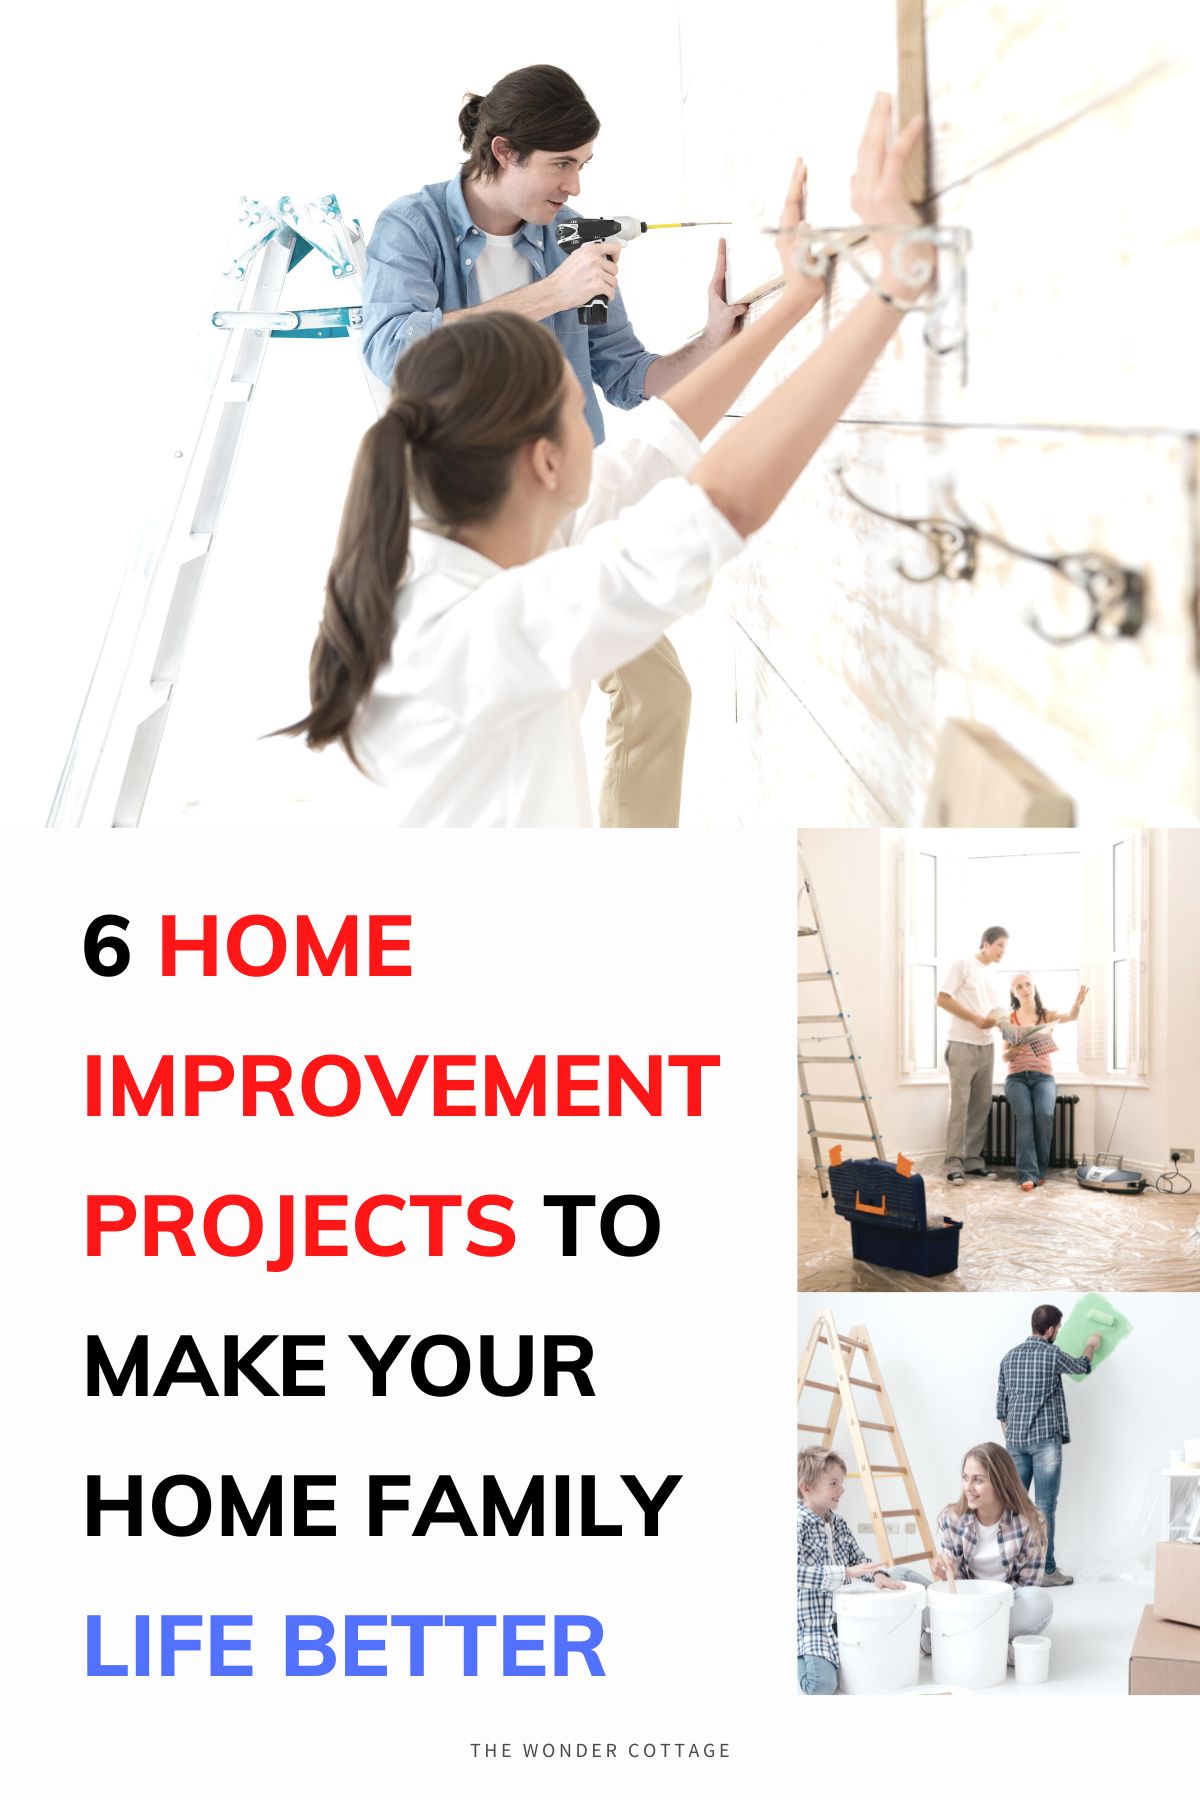 6 Home Improvement Projects To Make Your Home Family Life Better